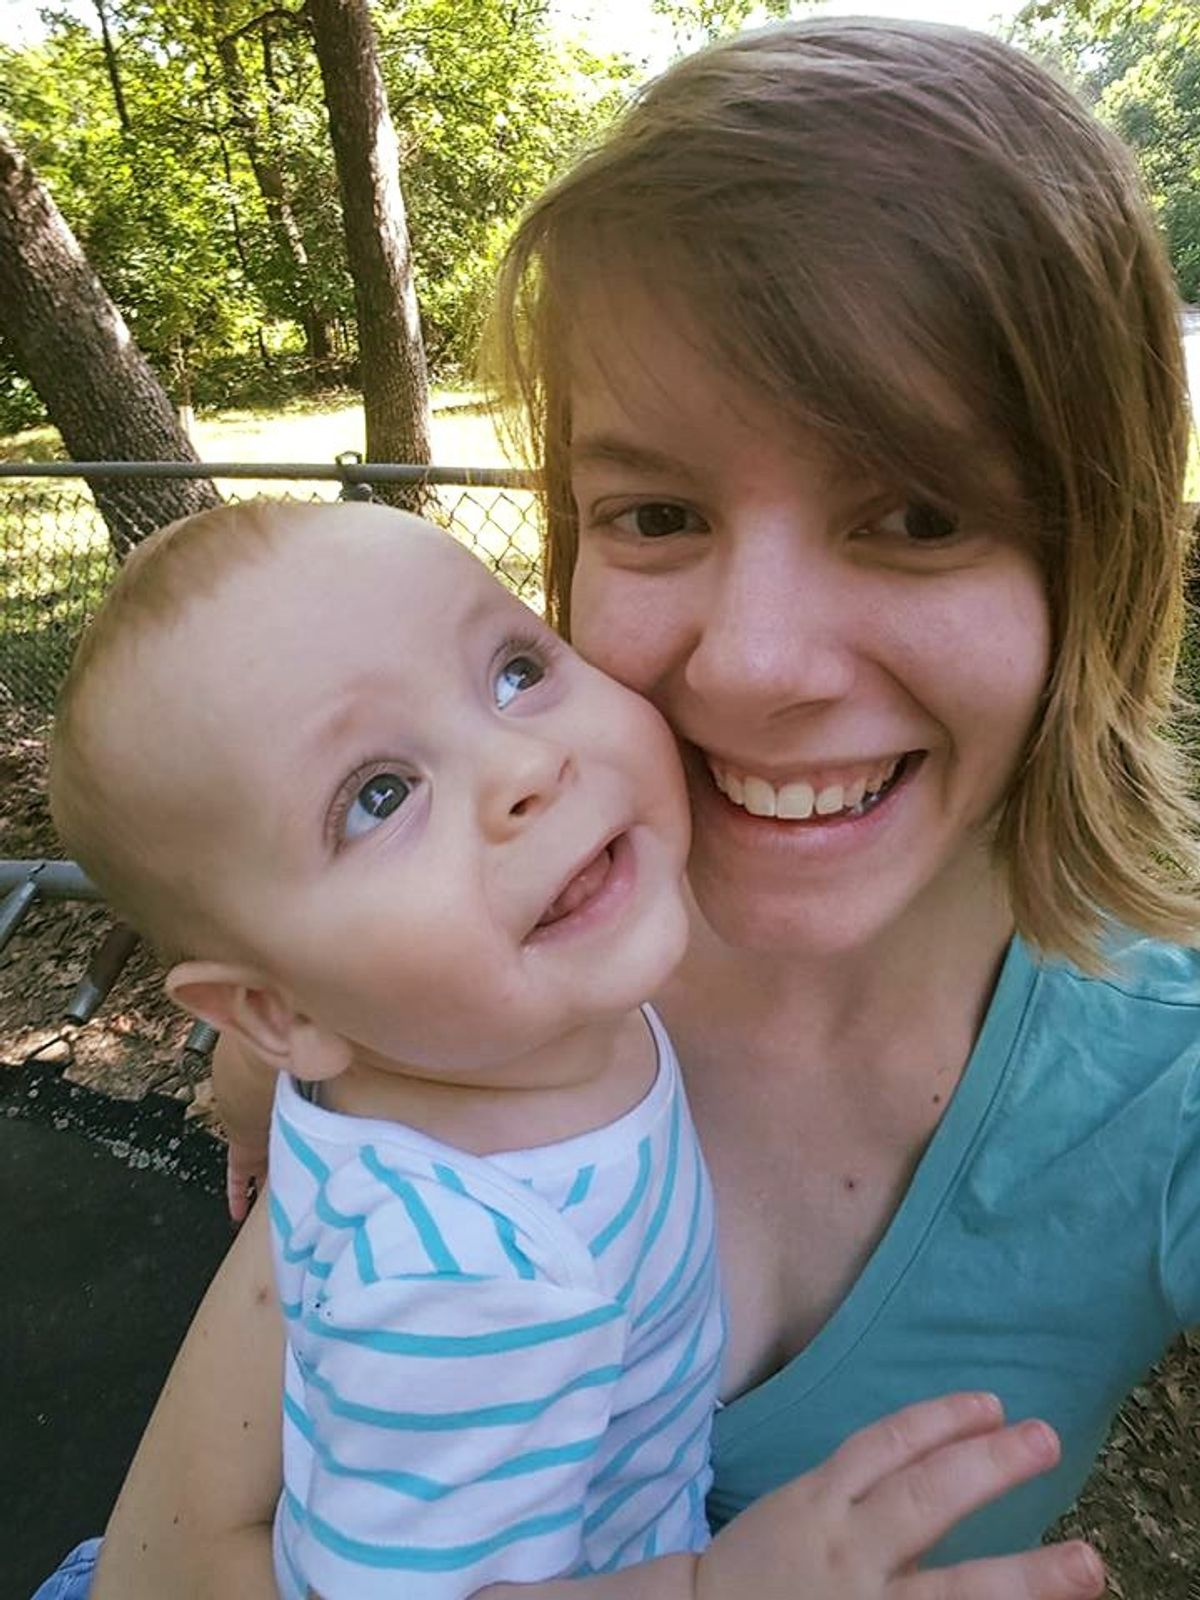 3 Things I've Learned in My First Year of Parenthood